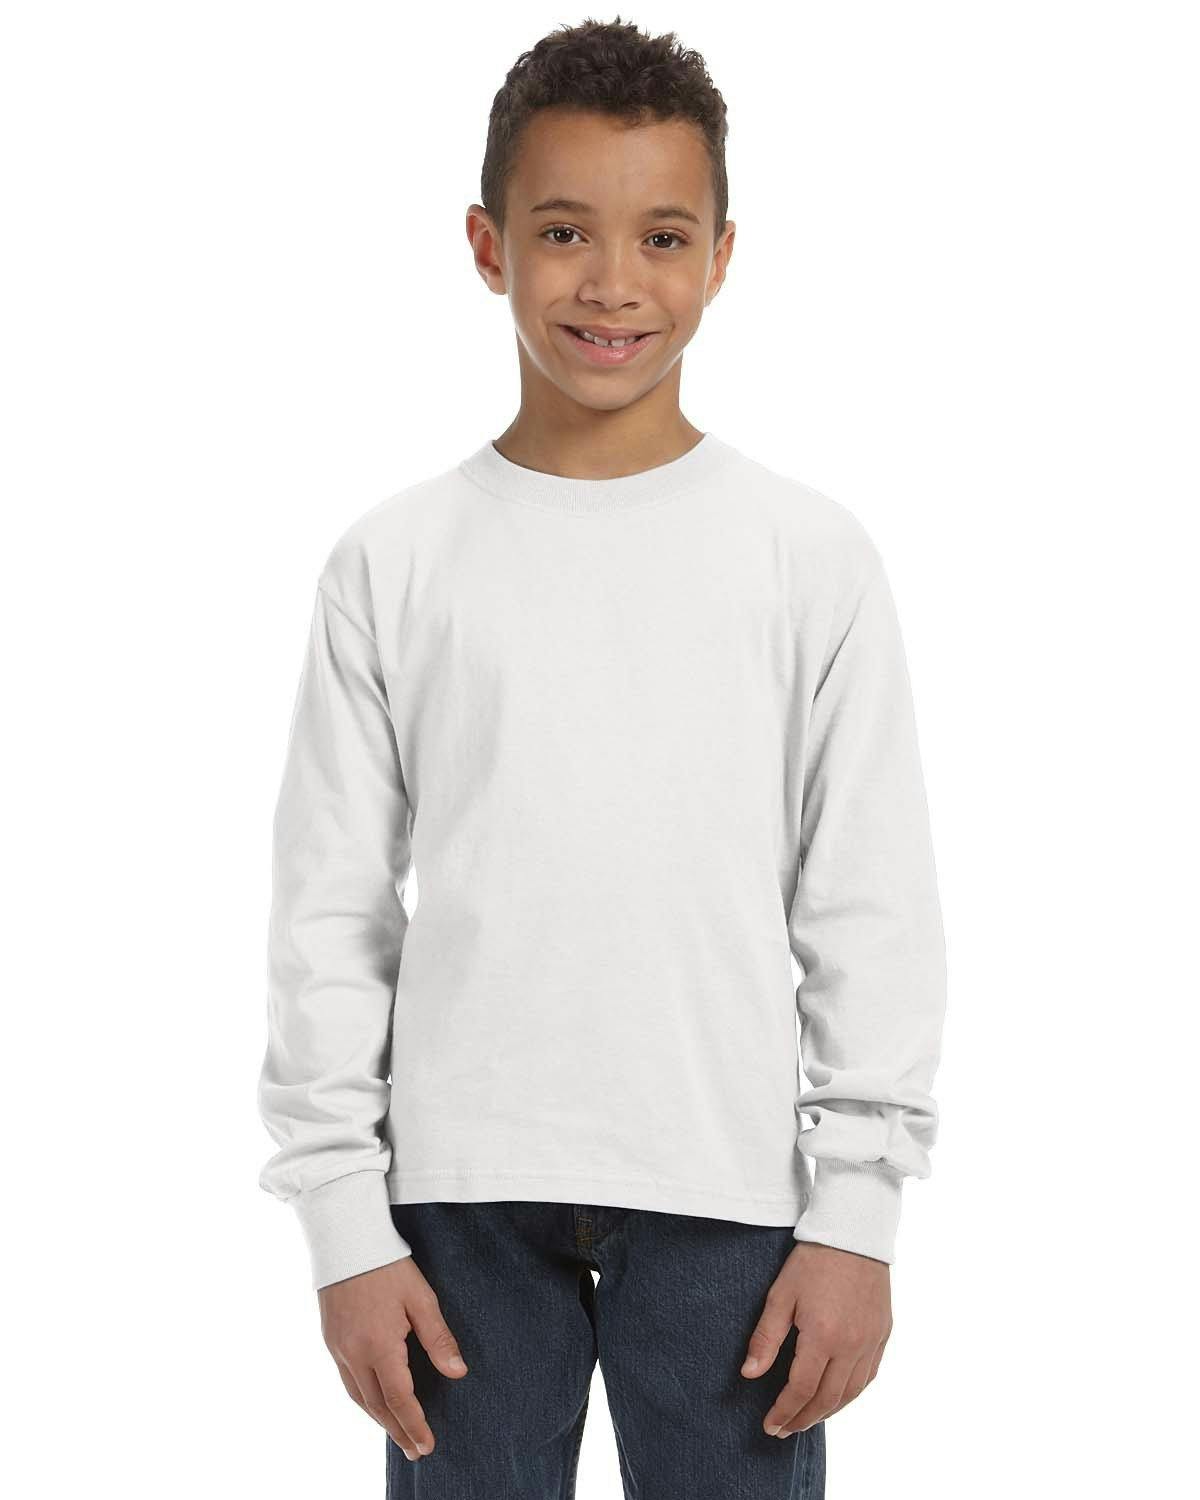 Image for Youth 5 oz. HD Cotton™ Long-Sleeve T-Shirt